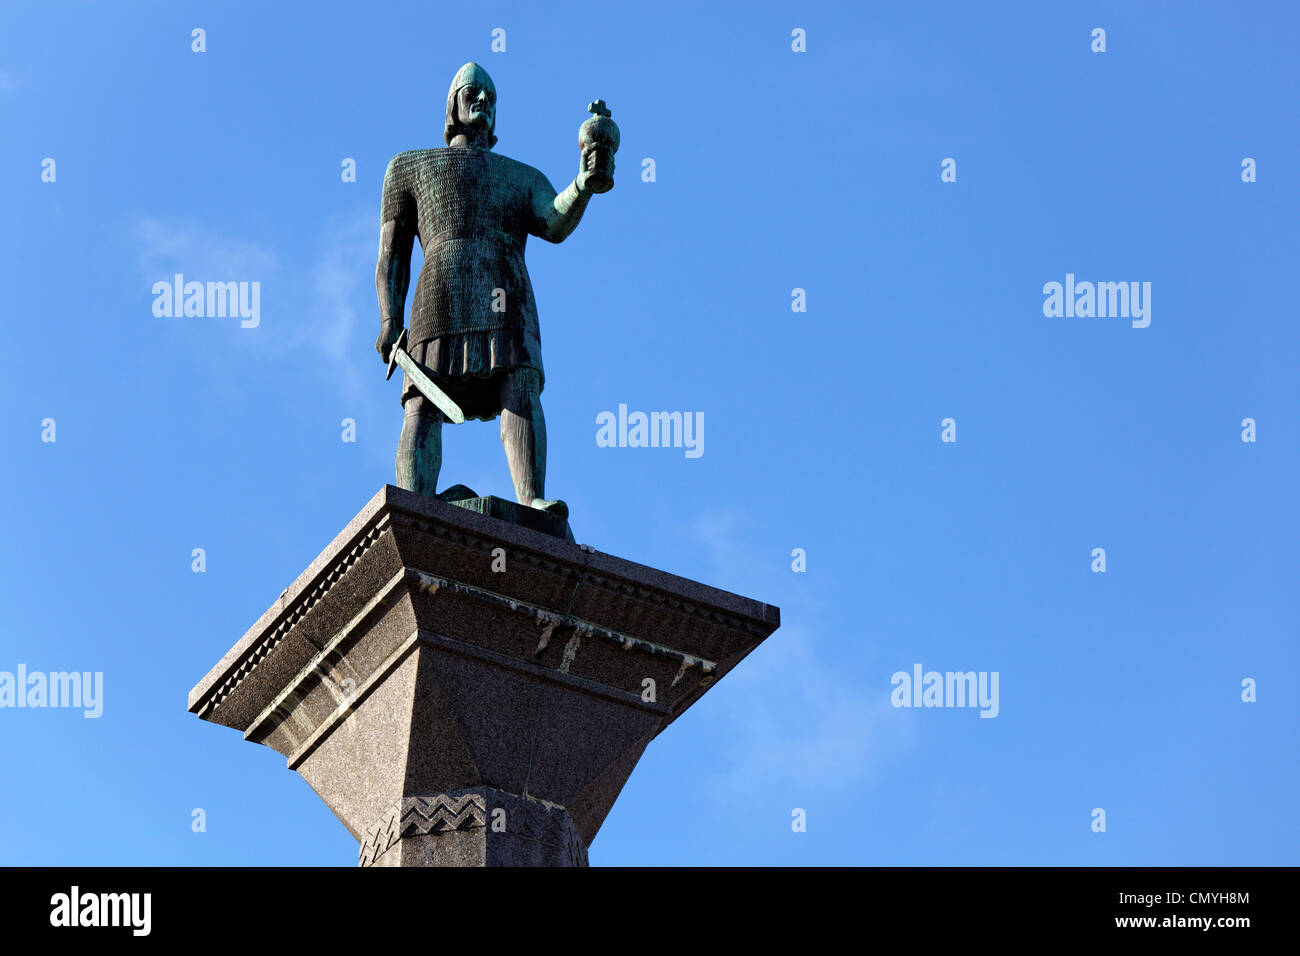 Norway, County of Sor Trondelag, Trondheim, Olav Tryggvason's statue, king of Norway from 995 to 1000, founder of Trondheim Stock Photo